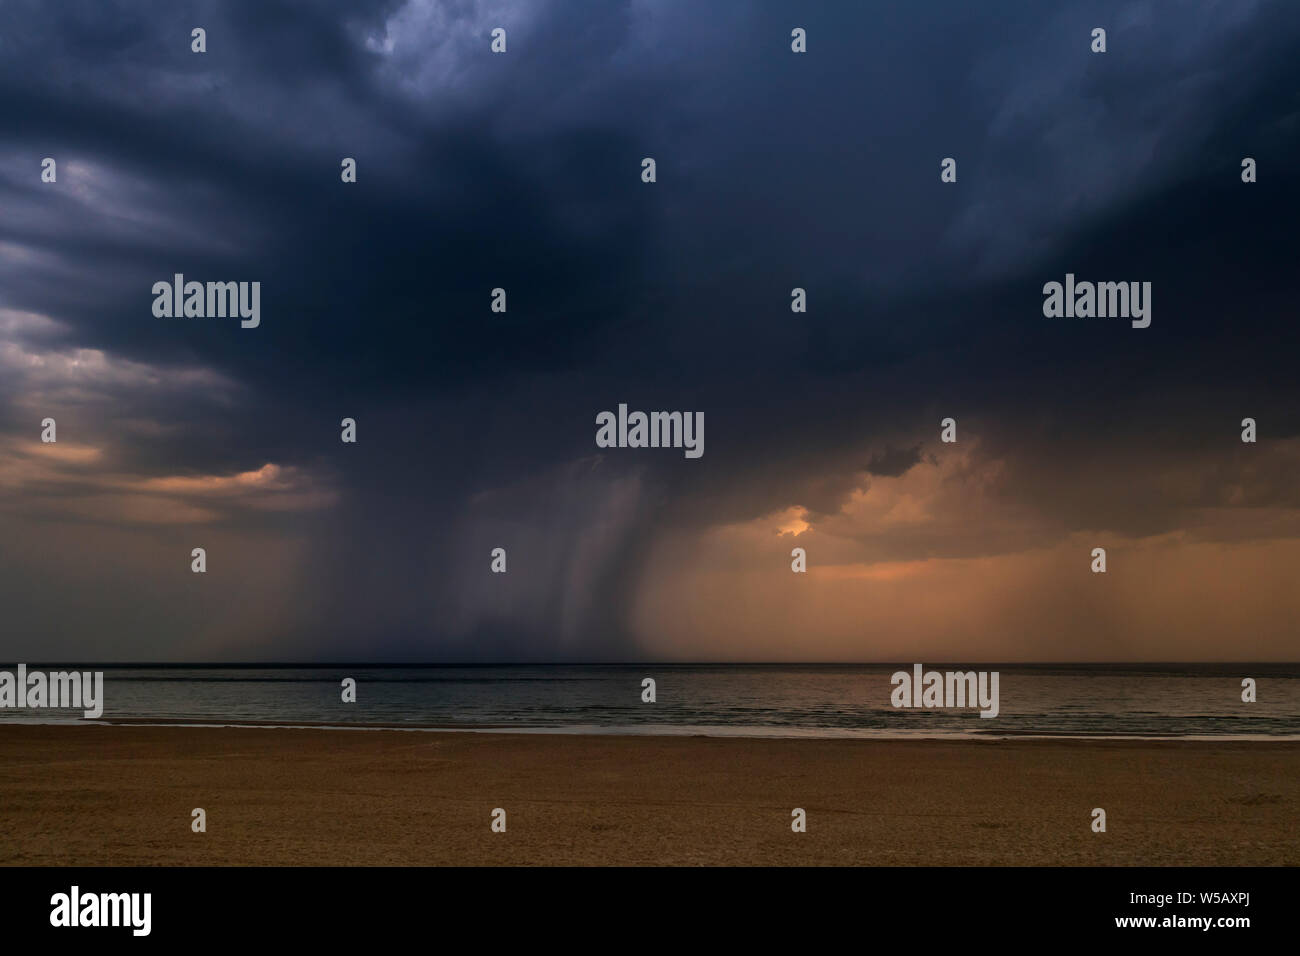 Thunderstorm showing dark rain clouds and cloudburst / deluge over the sea during heatwave / heat wave in summer Stock Photo